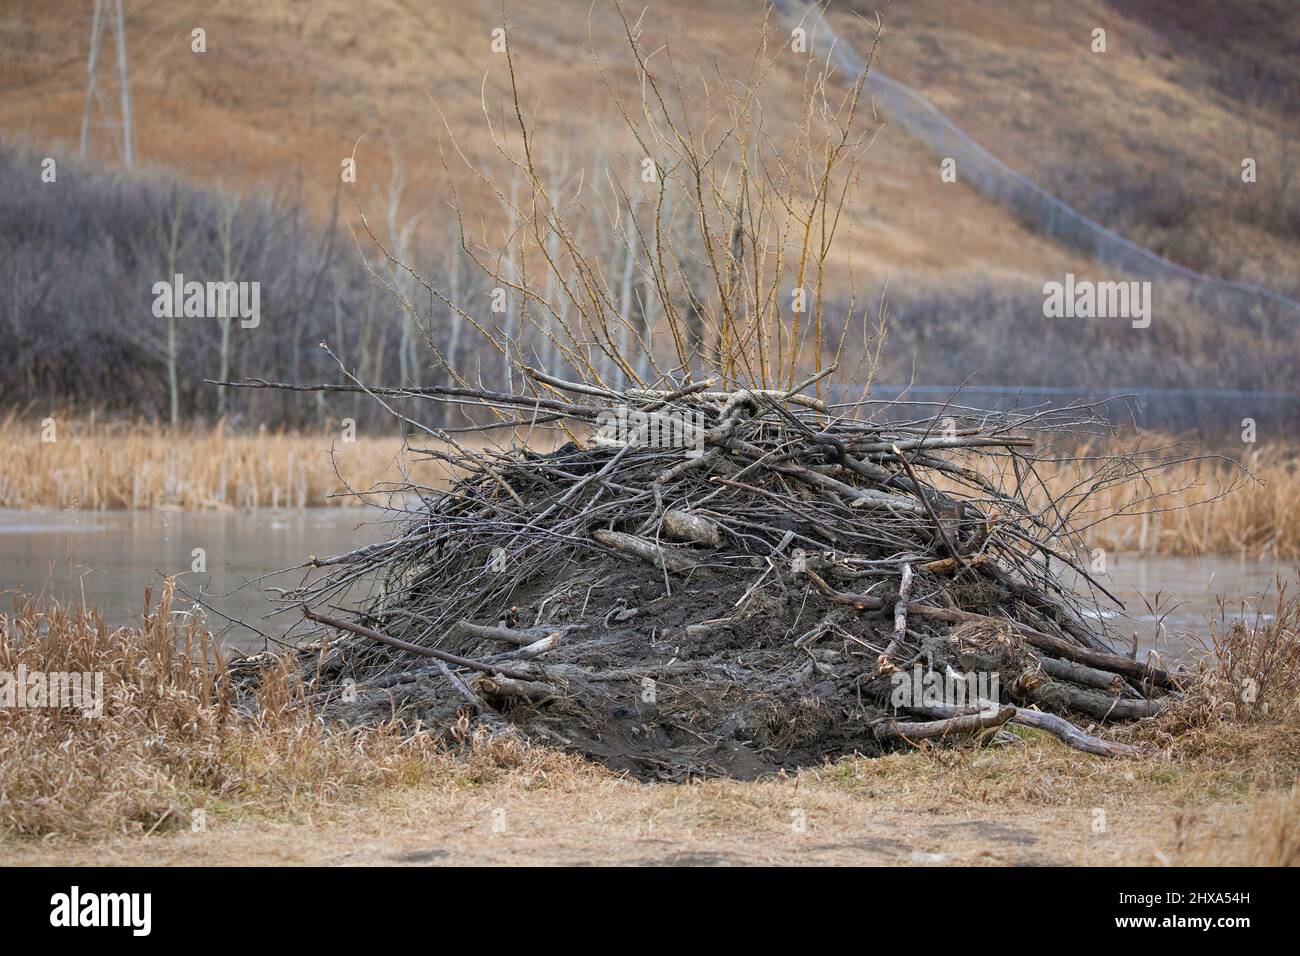 Beaver lodge made of mud and tree branches on land at the edge of a stormwater pond in city Stock Photo